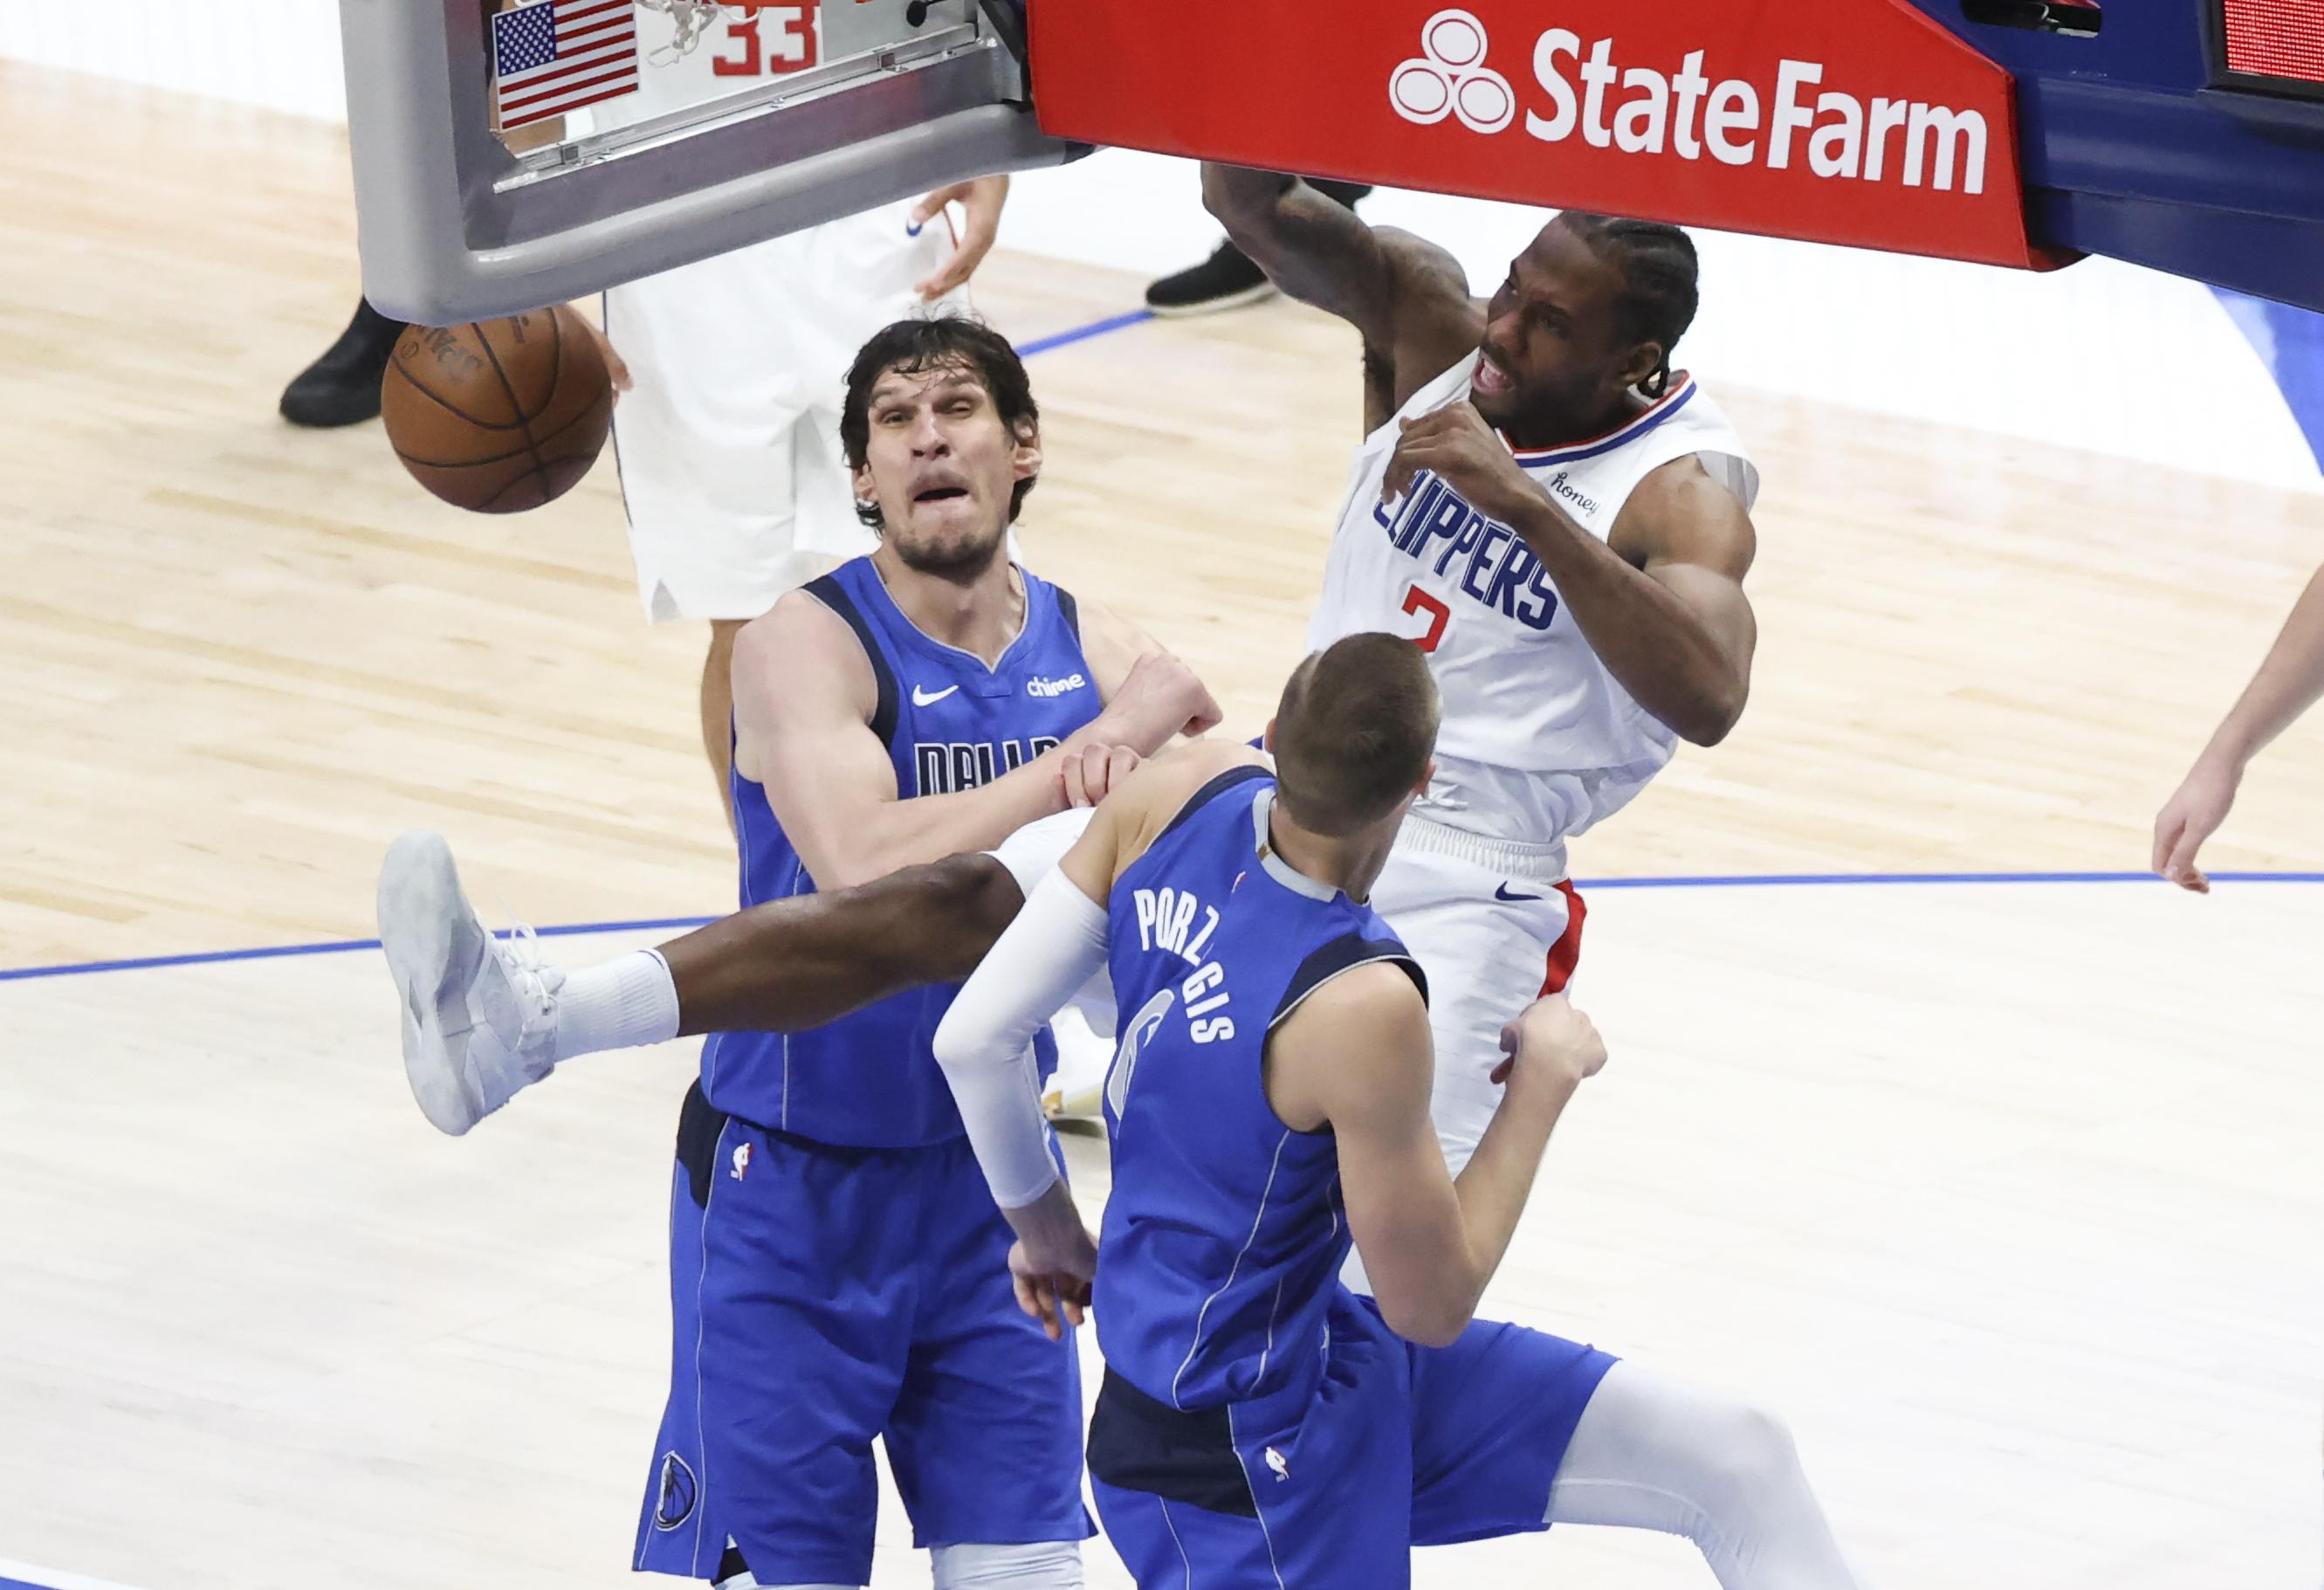 Home sweet home: Clippers beat Mavs in Game 7 to win series